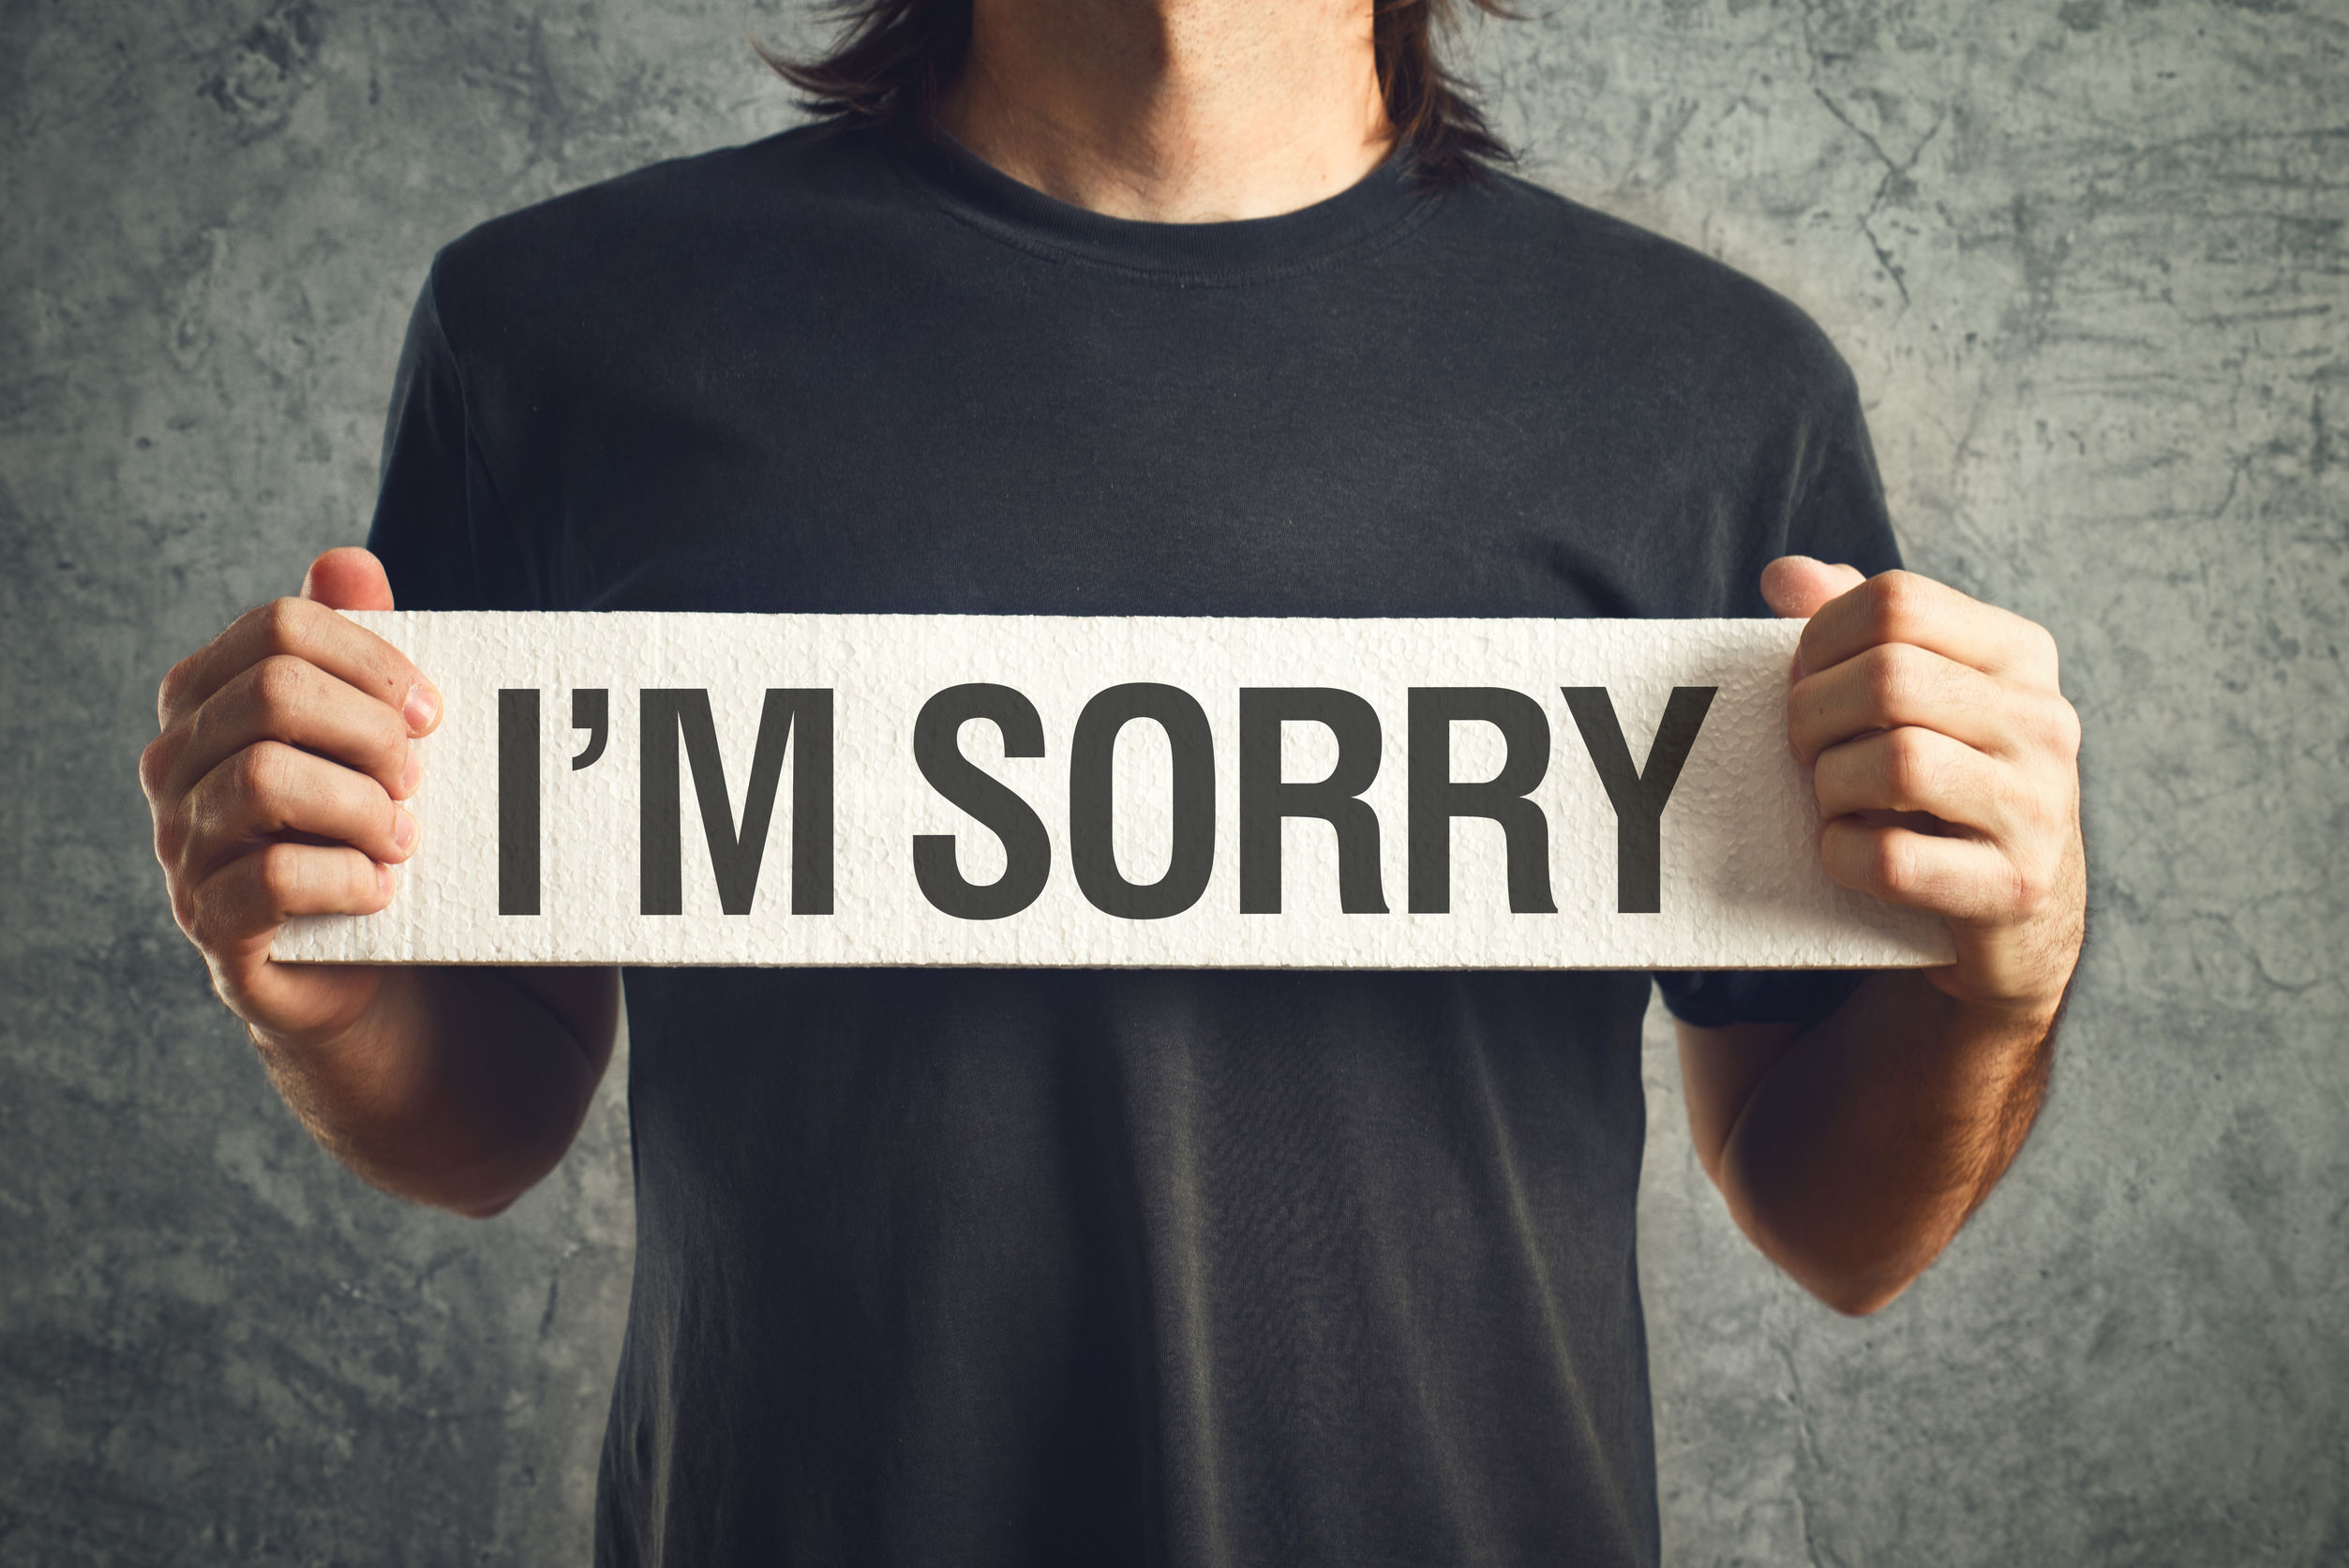 Do you know the secret to an authentic apology?